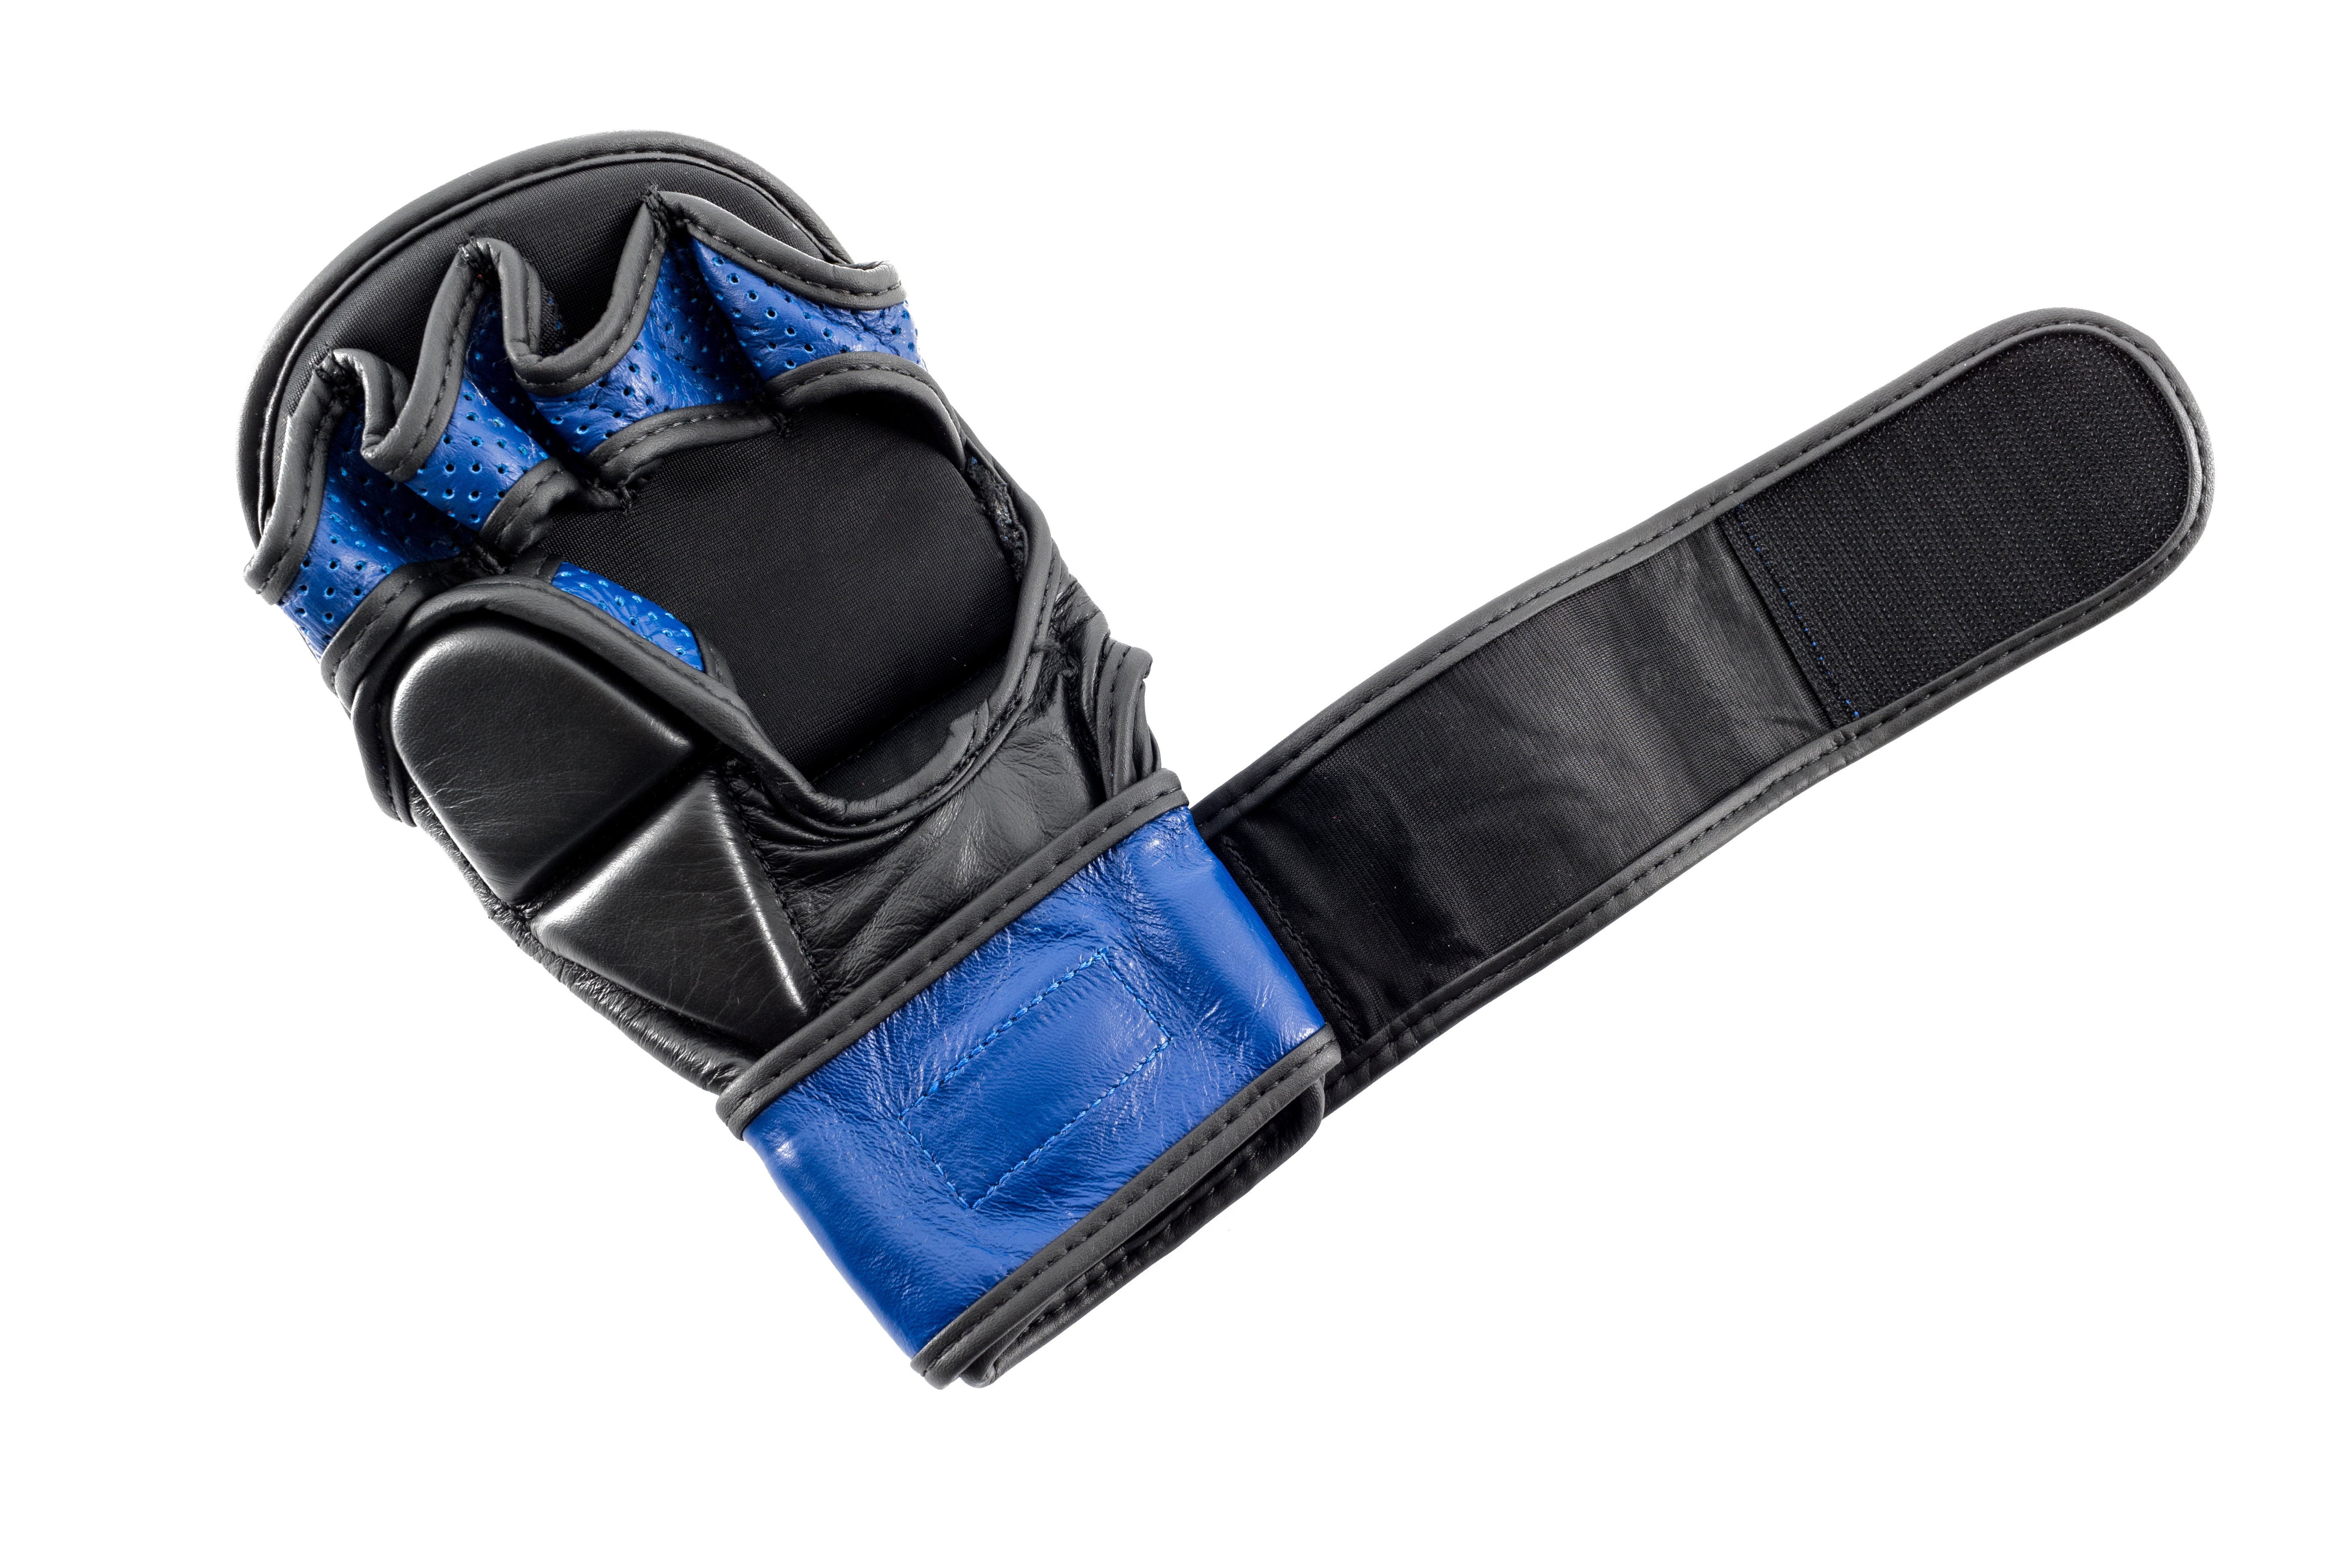 UFC Pro MMA Safety Sparring Gloves - Blue/Black Grappling and Striking 6oz Mixed  Martial Arts Gloves large/xlarge 